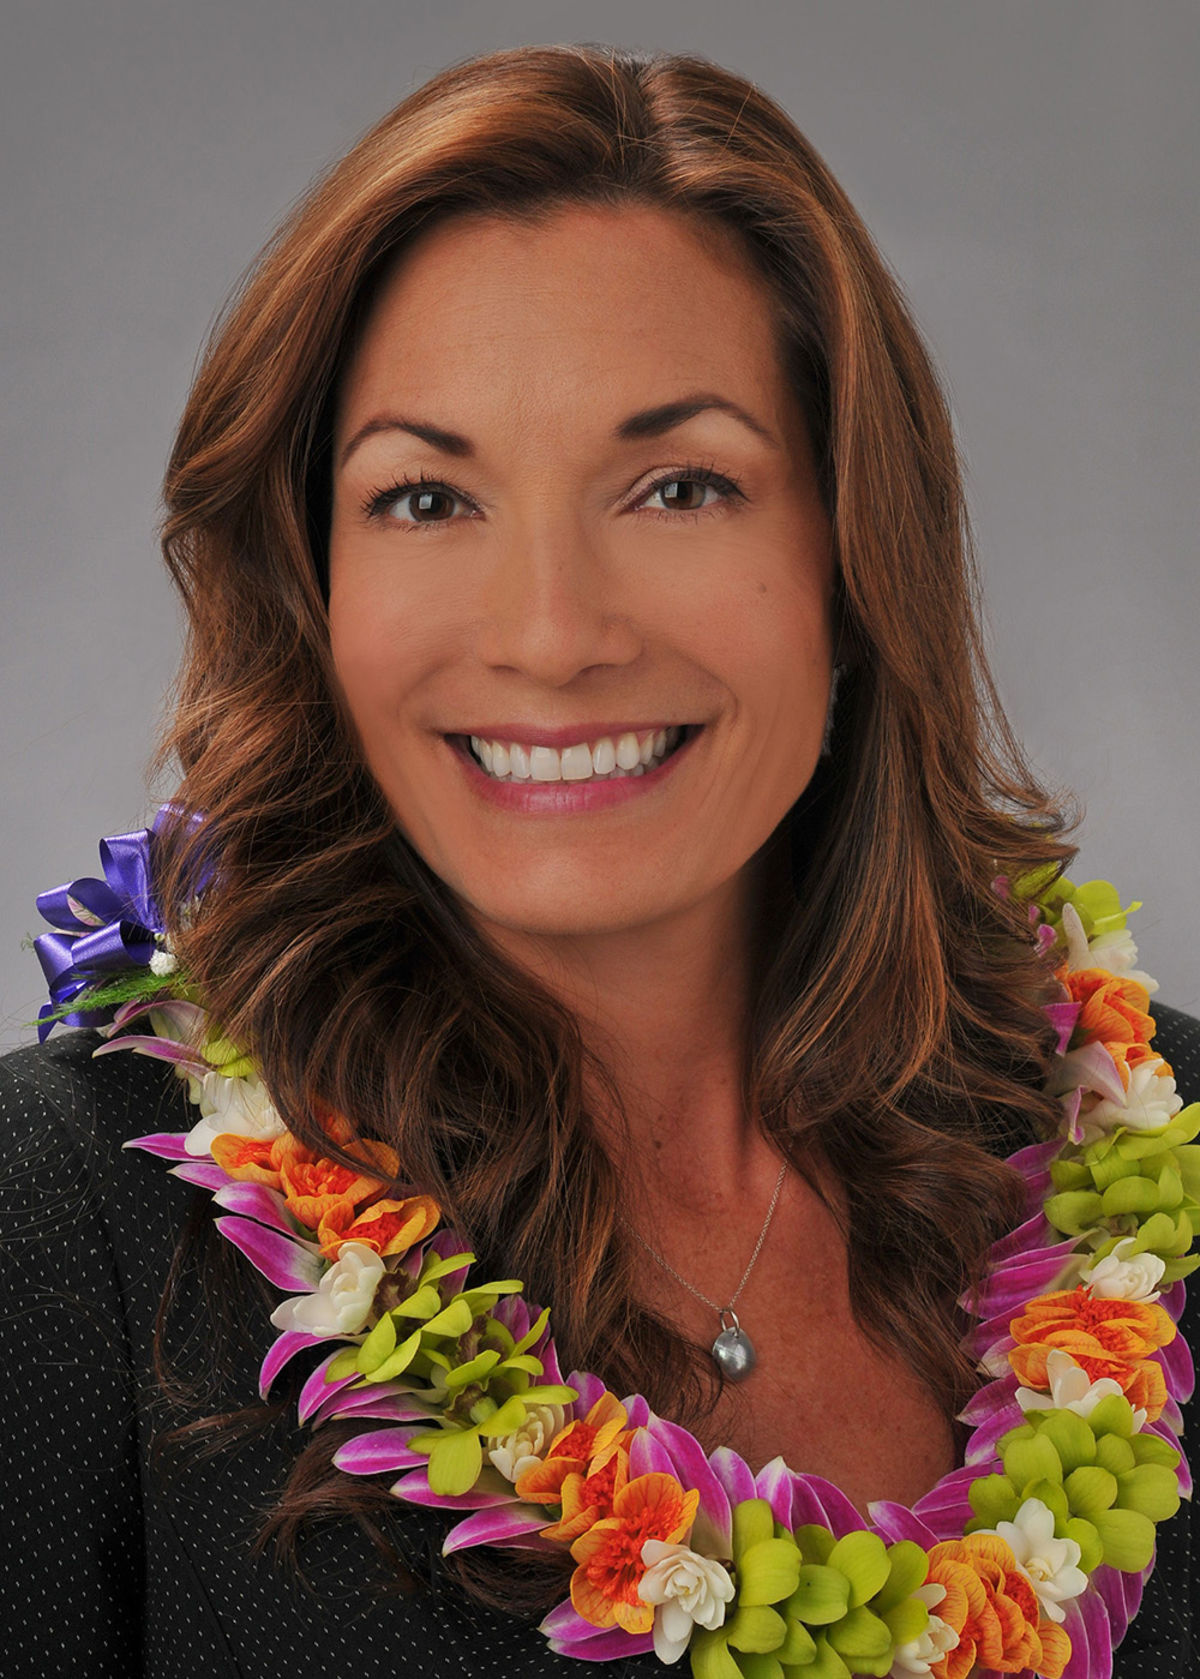 Hawaii Convention Center General Manager Teri Orton, recipient of the Women in Lodging & Tourism – Hawaii Chapter’s 2018 Woman of the Year Award.